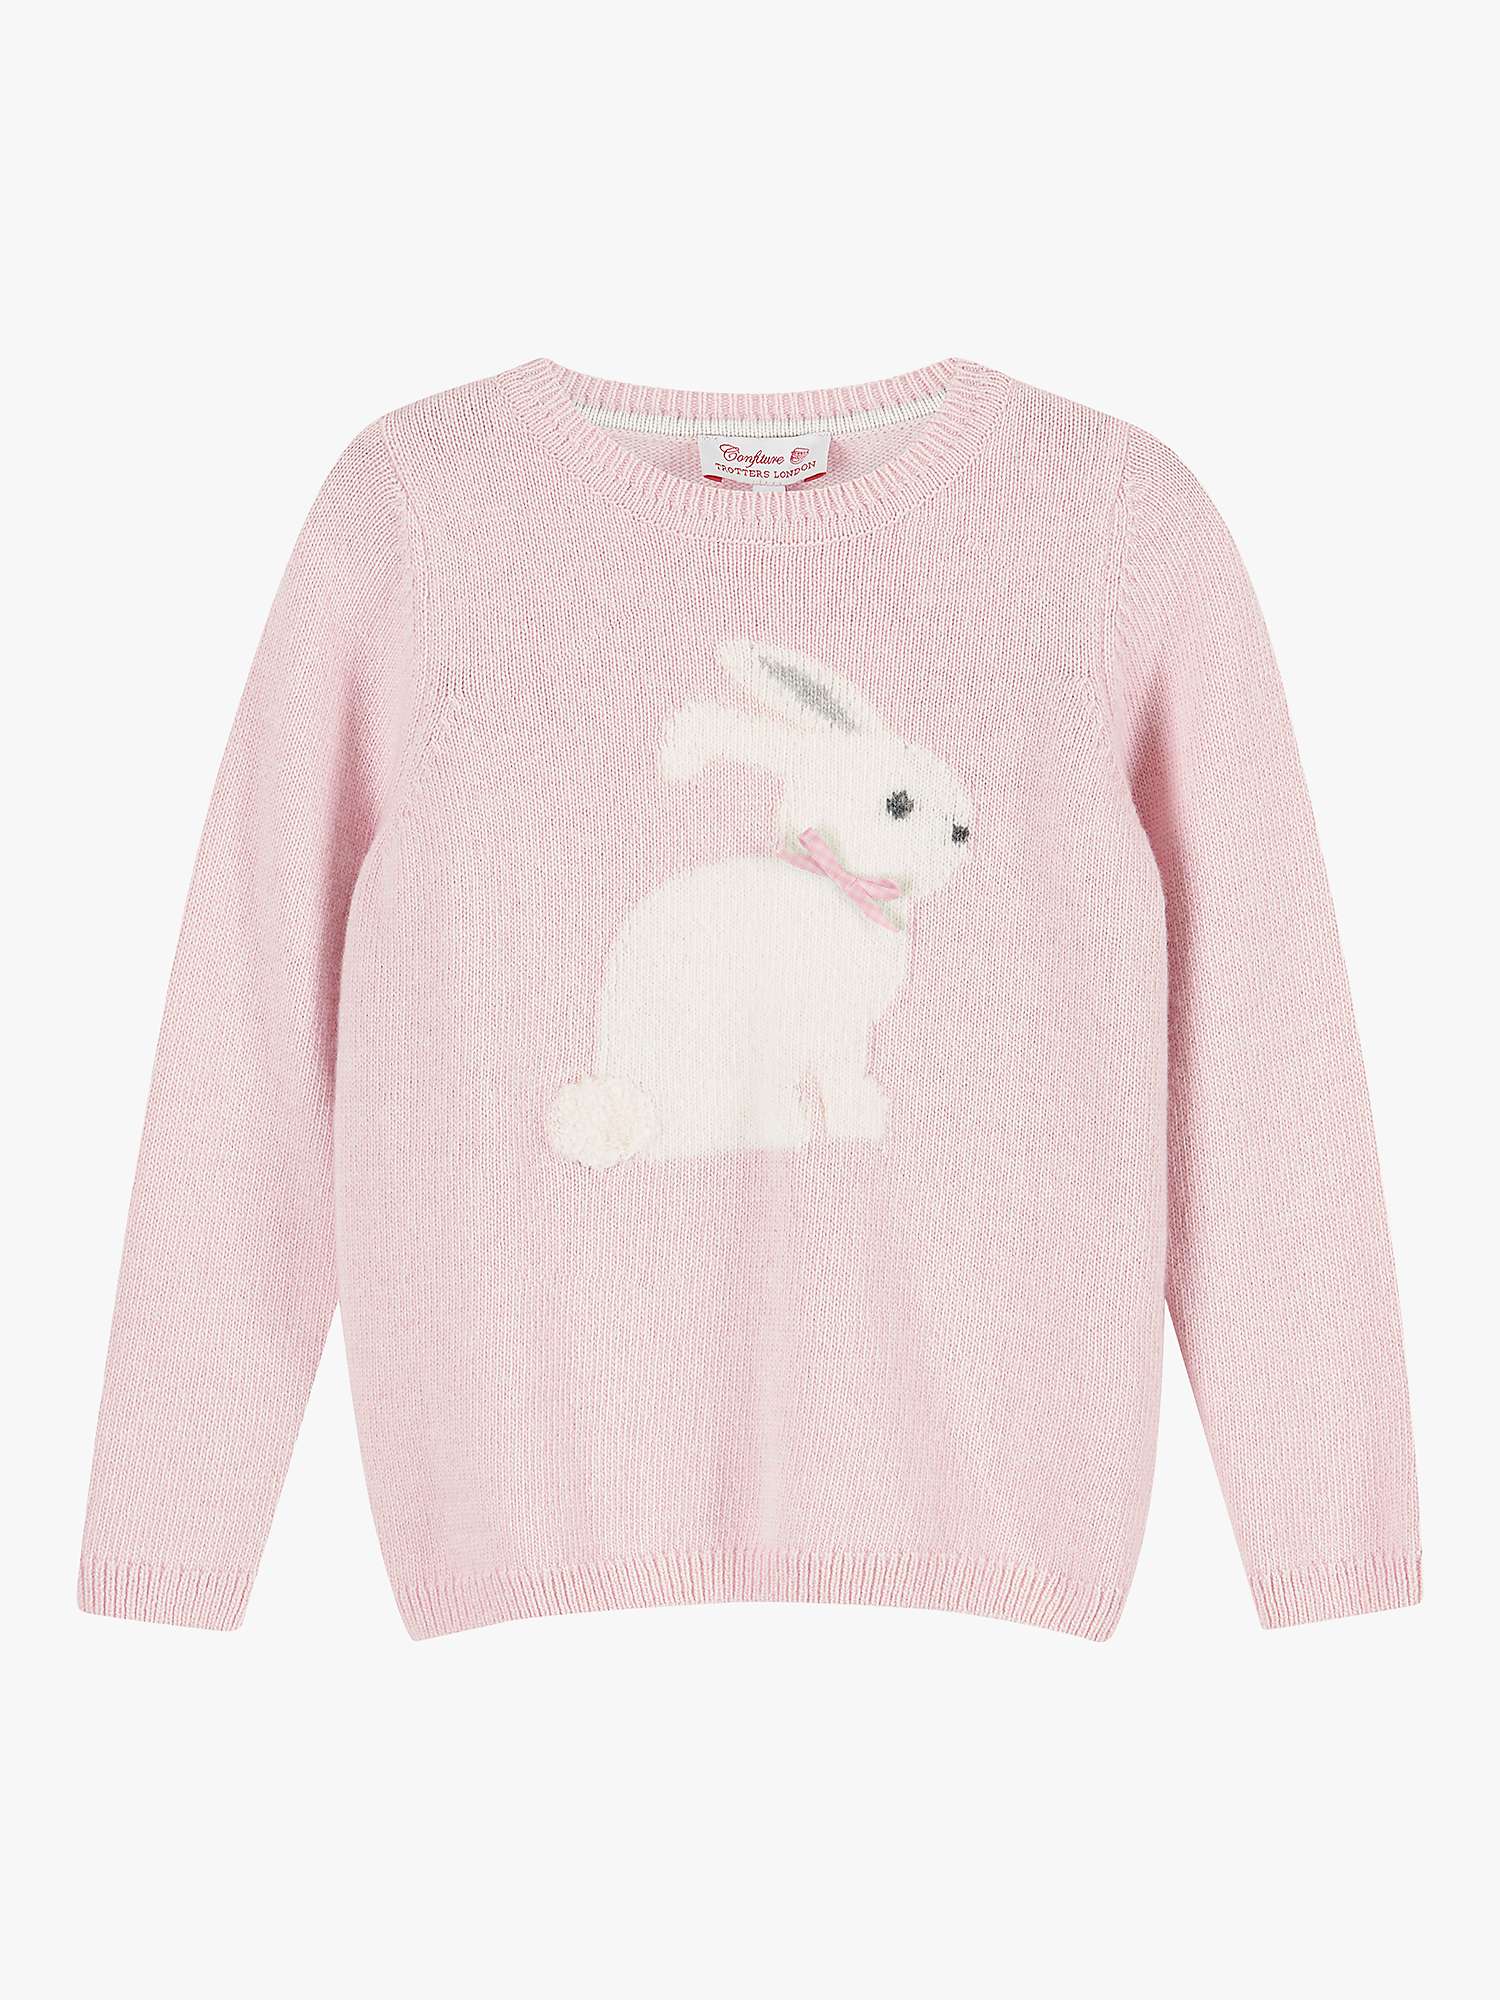 Buy Trotters Kids' Coco Bunny Jumper, Pale Pink Online at johnlewis.com